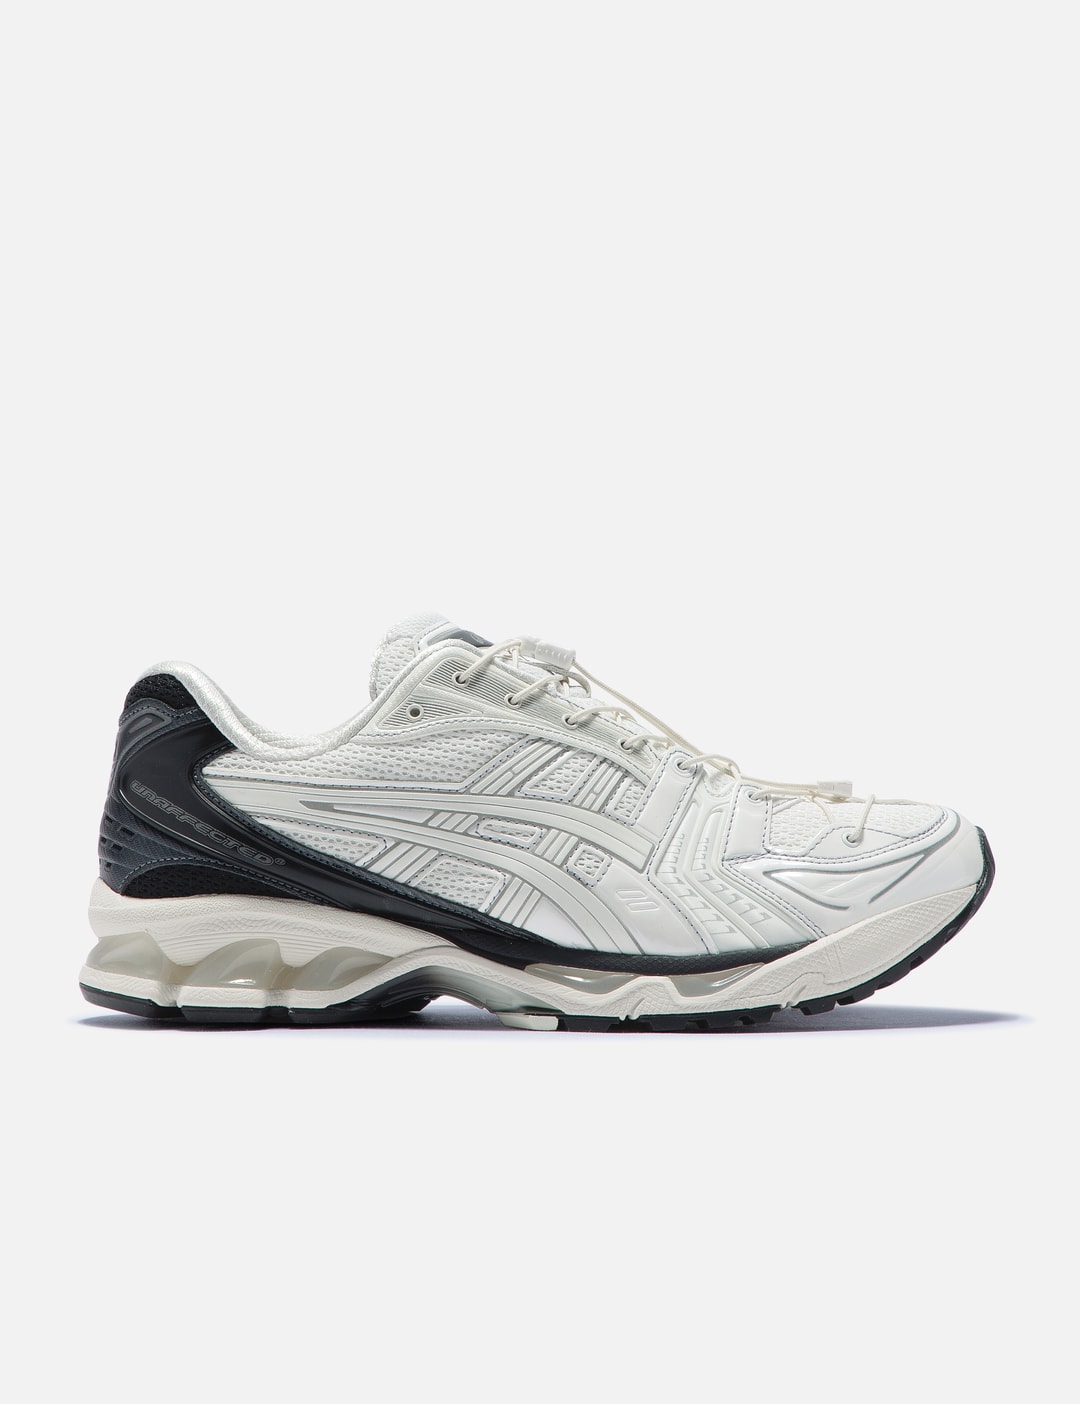 Asics - Unaffected x Gel-Kayano 14 | HBX - Globally Curated Fashion and ...